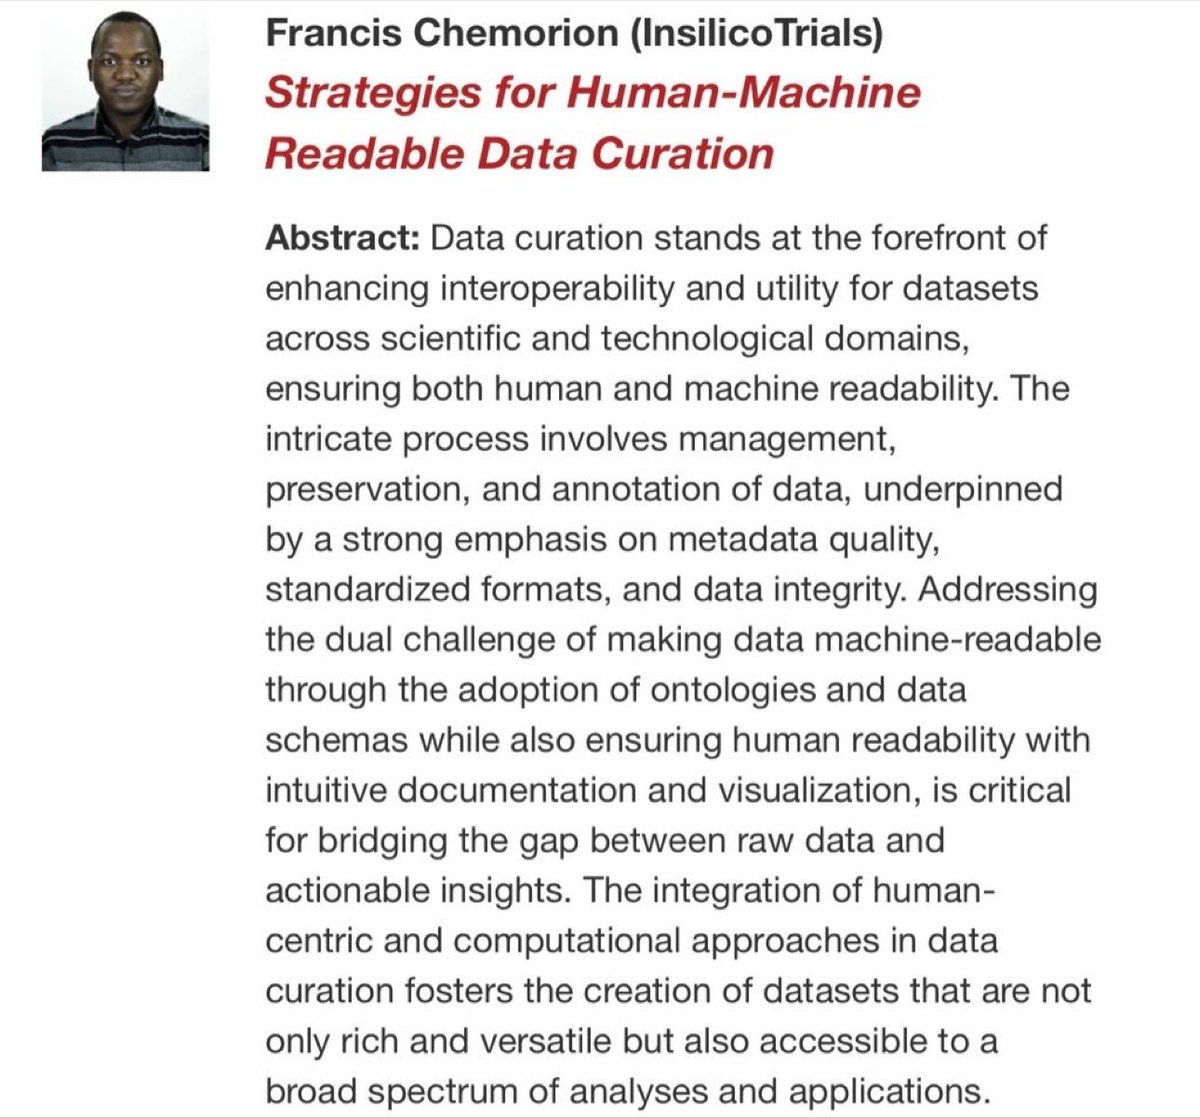 🌟 The Human Digital Twin Summer School in Barcelona, June 3-7, 2024 Our own @fkchemorion will share insights on human-machine readable data curation Join us and the @Disc4all_EU for a deep dive into #insilicomedicine ✍️eventum.upf.edu/112371/detail/… #humandigitaltwin #insilico